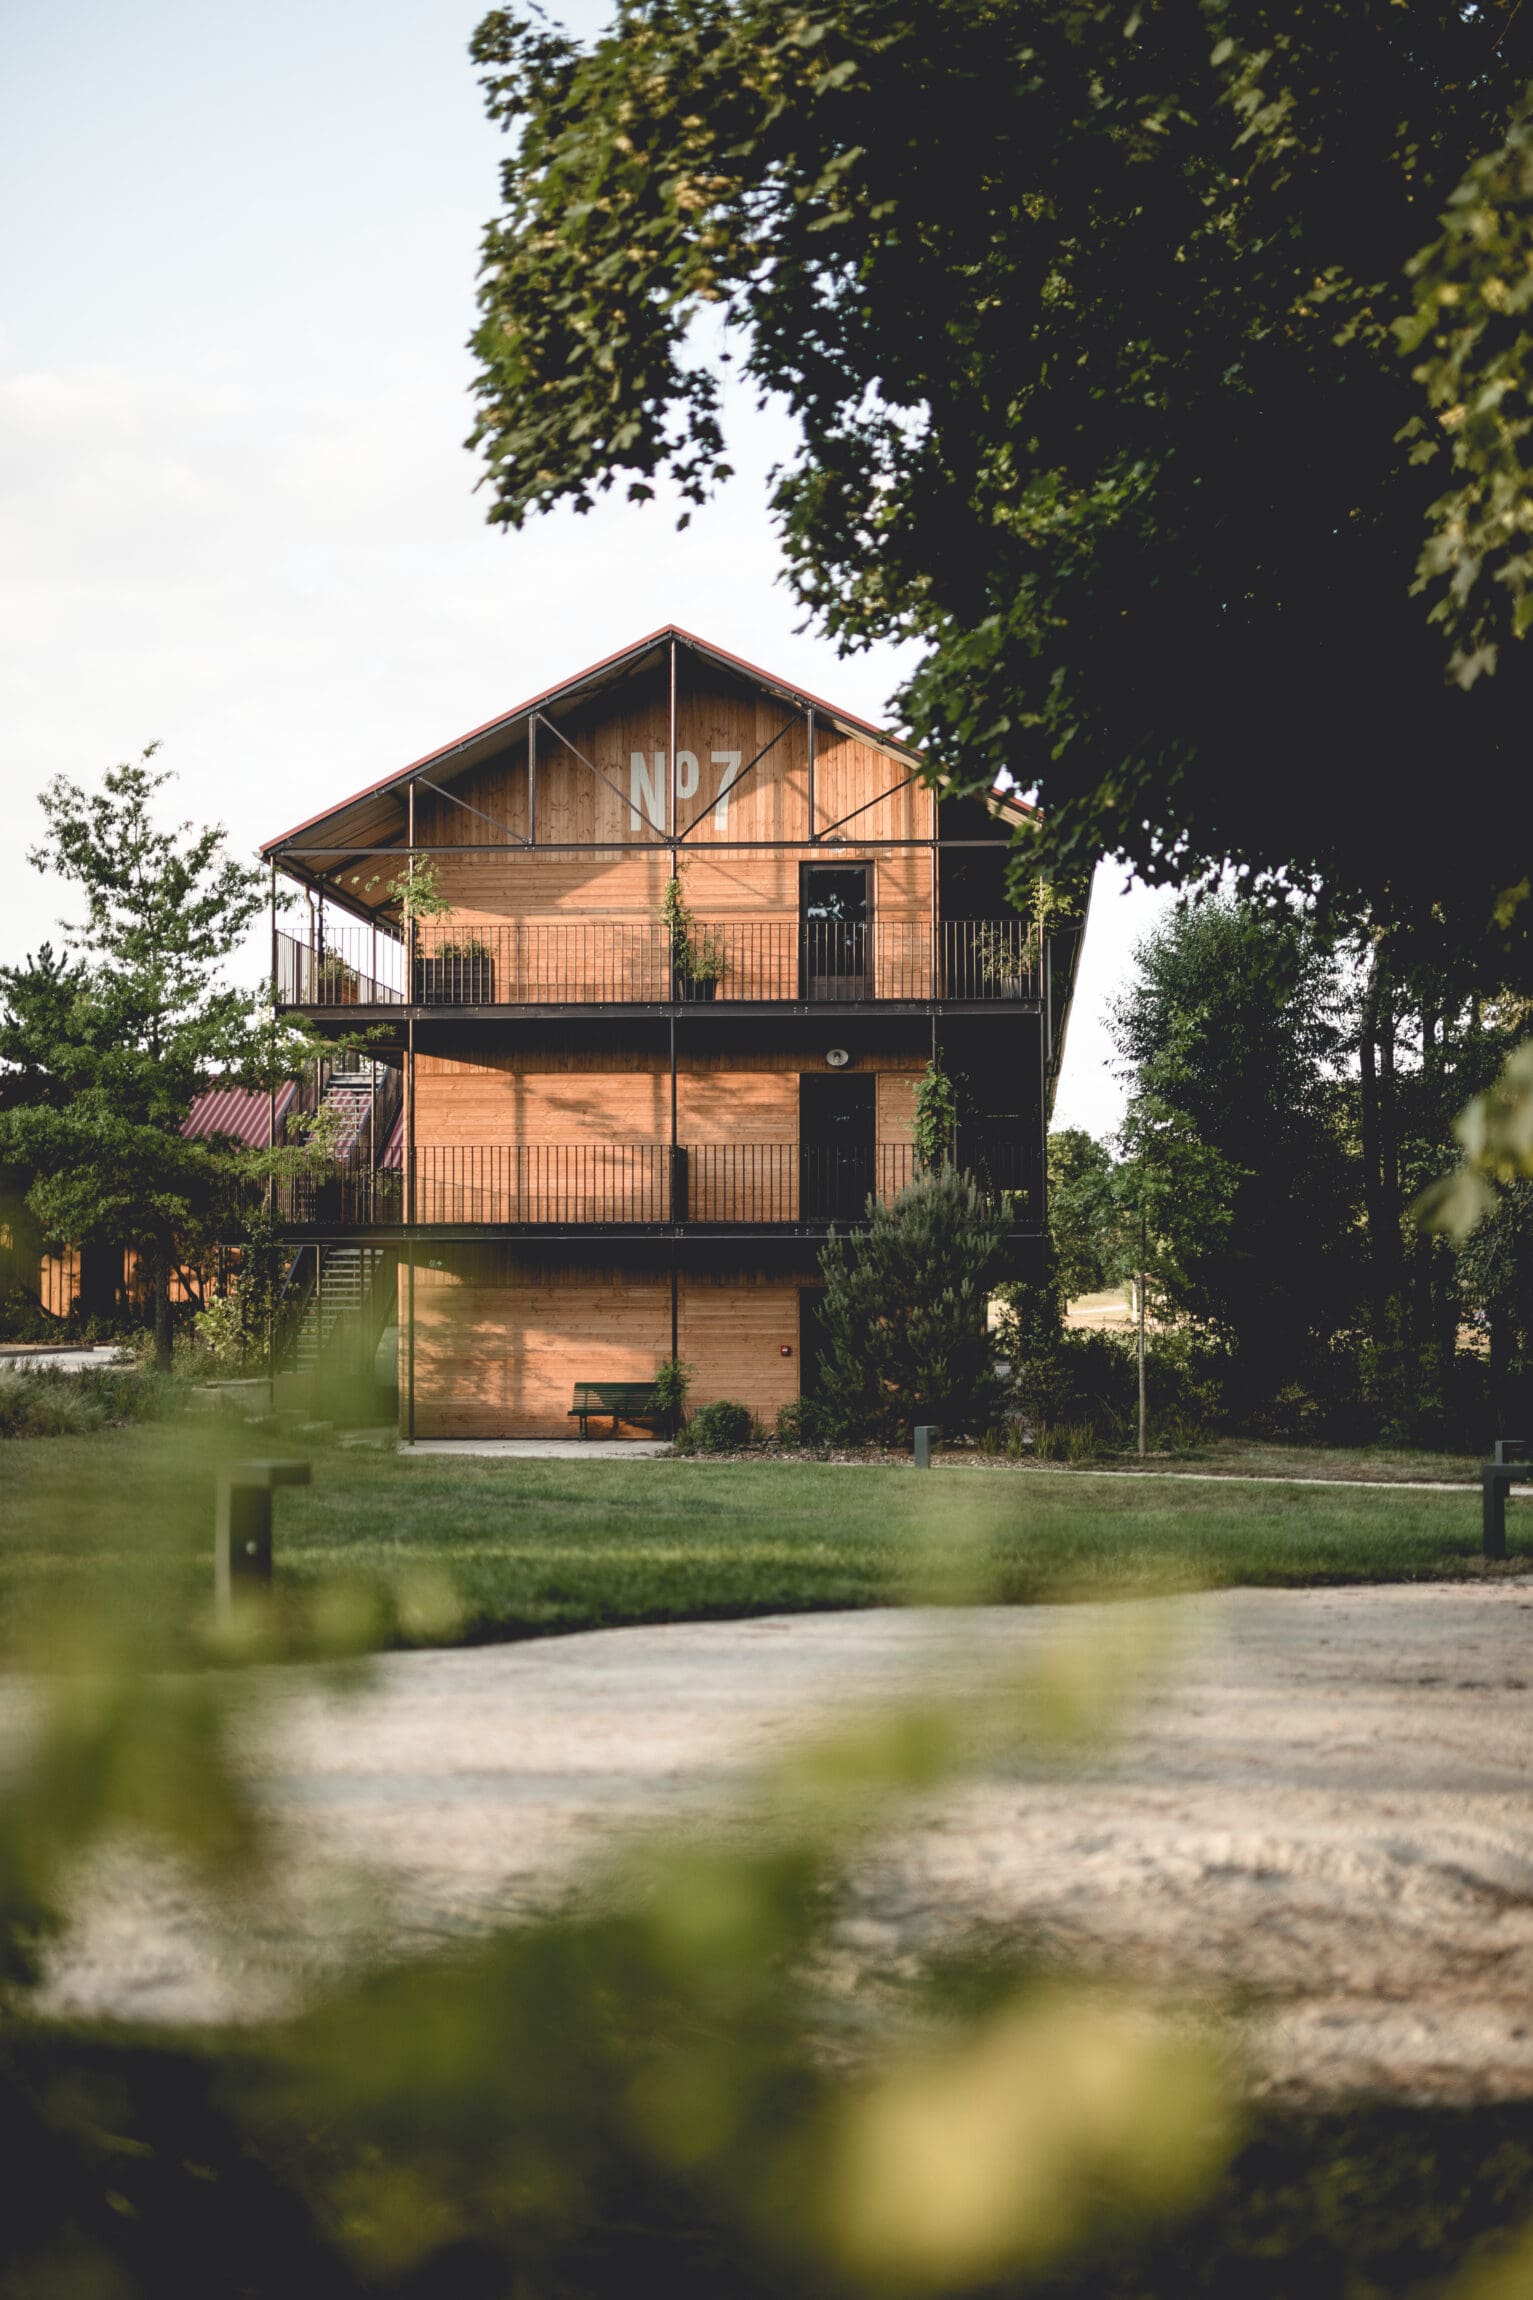 The best farm stays in Europe | The rustic exterior of Le Barn